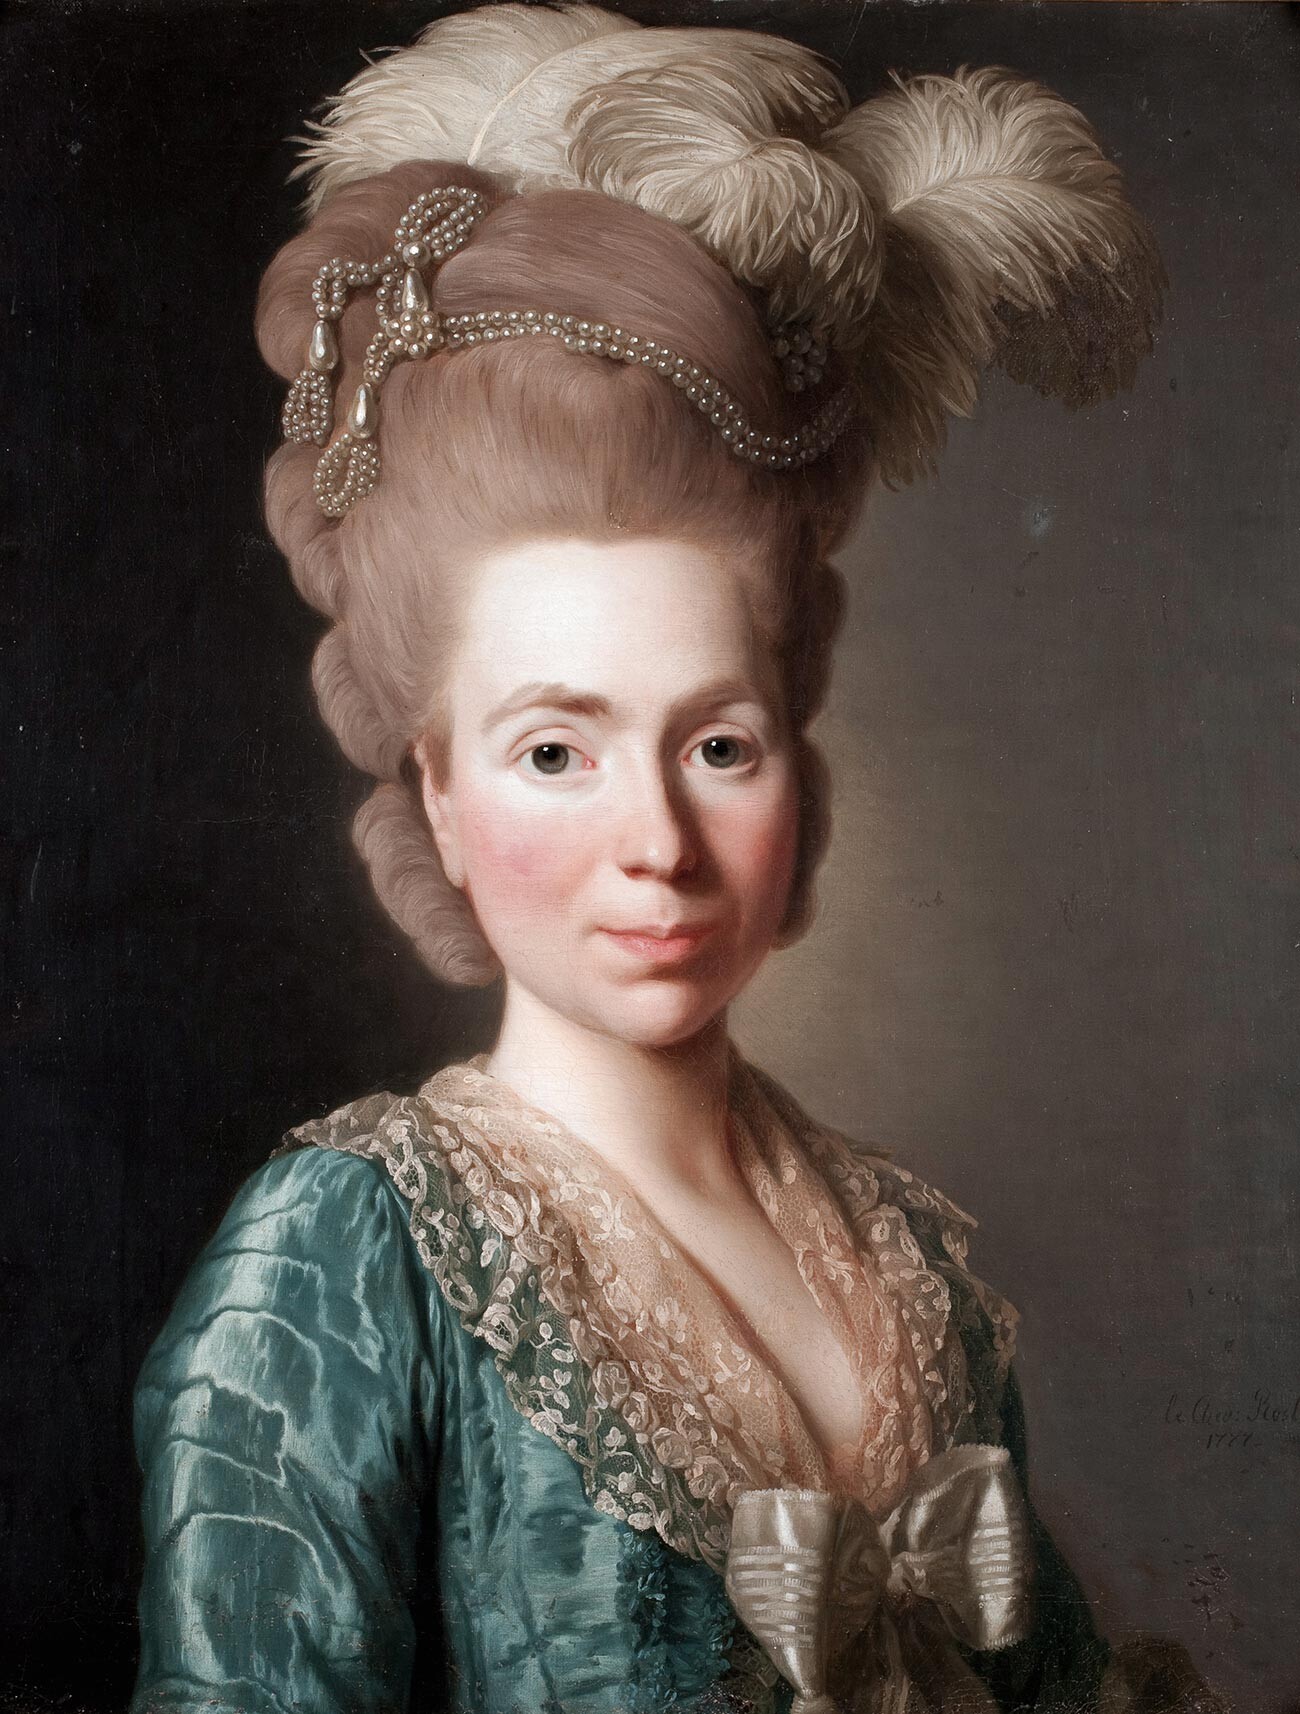 Natalya Golitsyna (1741-1837), one of the wealthiest Russian women of the 18th-19th century